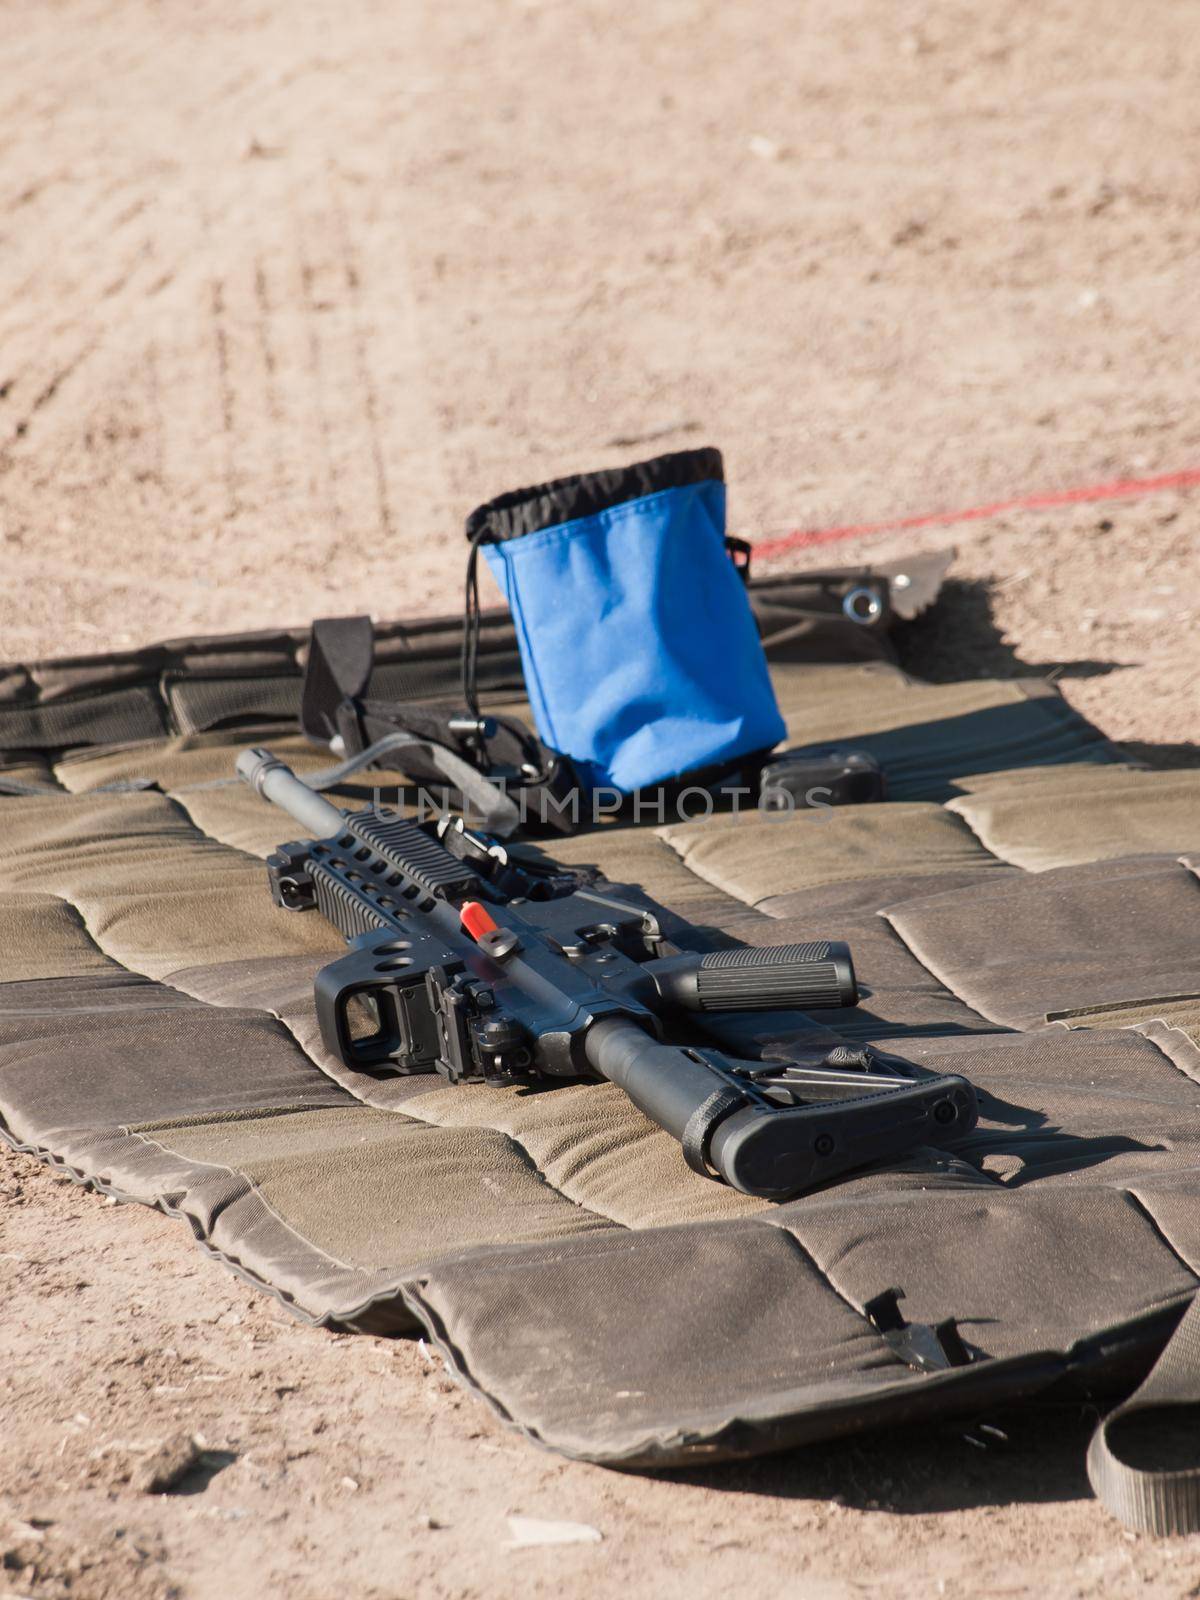 Rifle on the shooting mat with safety on.